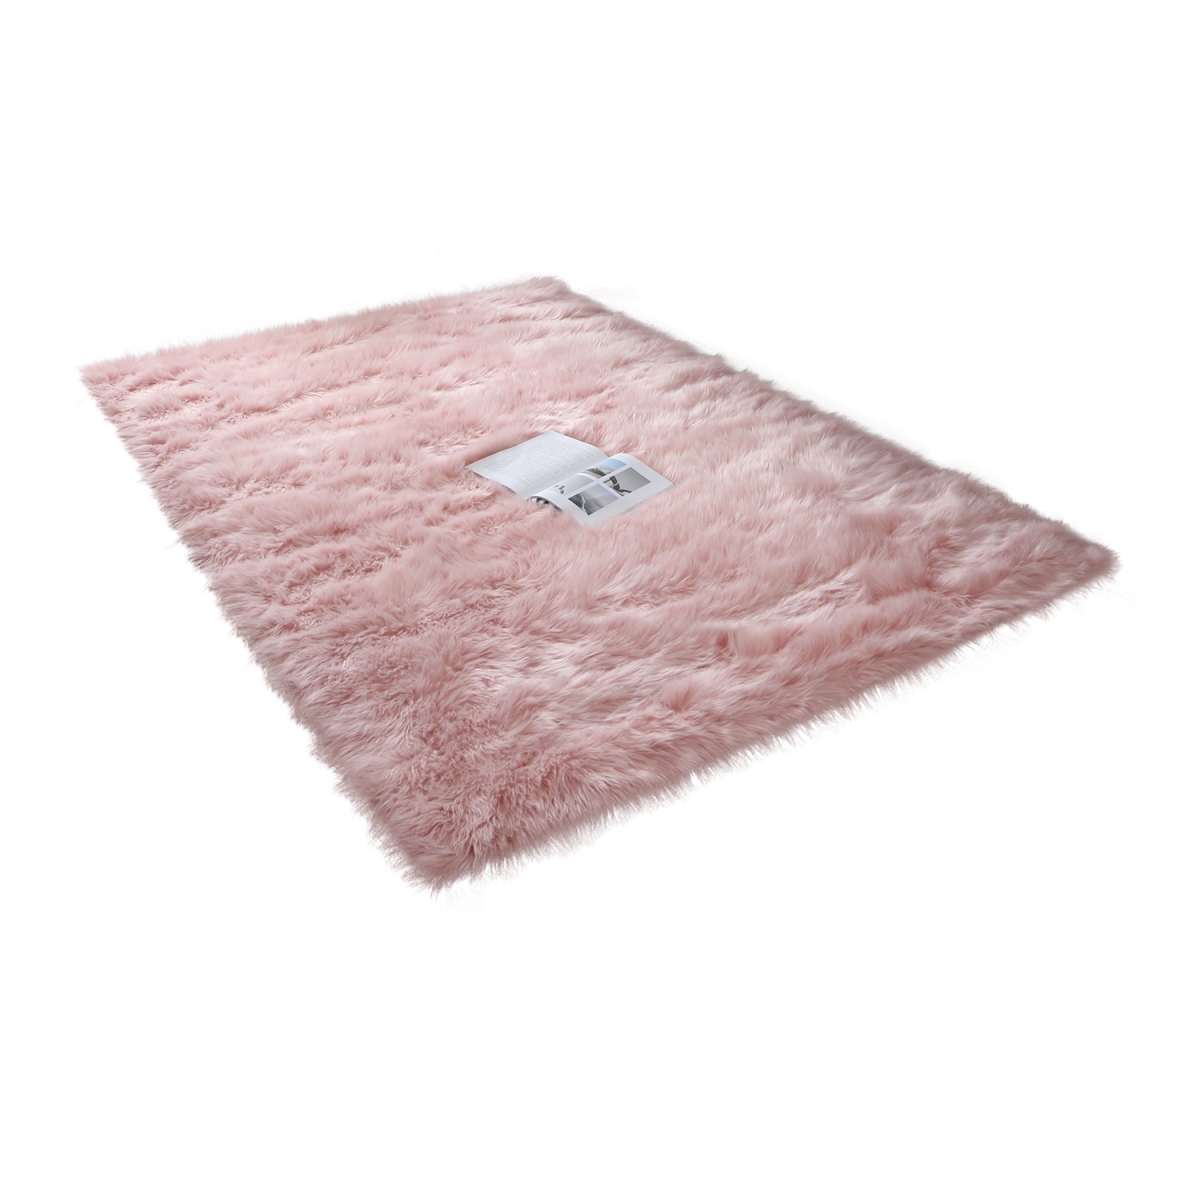 Picture of Amazing Rugs LSRPK0033-46 4 x 6 ft. Cozy Collection Ultra Soft Fluffy Faux Fur Sheepskin Hand Tufted Area Rug